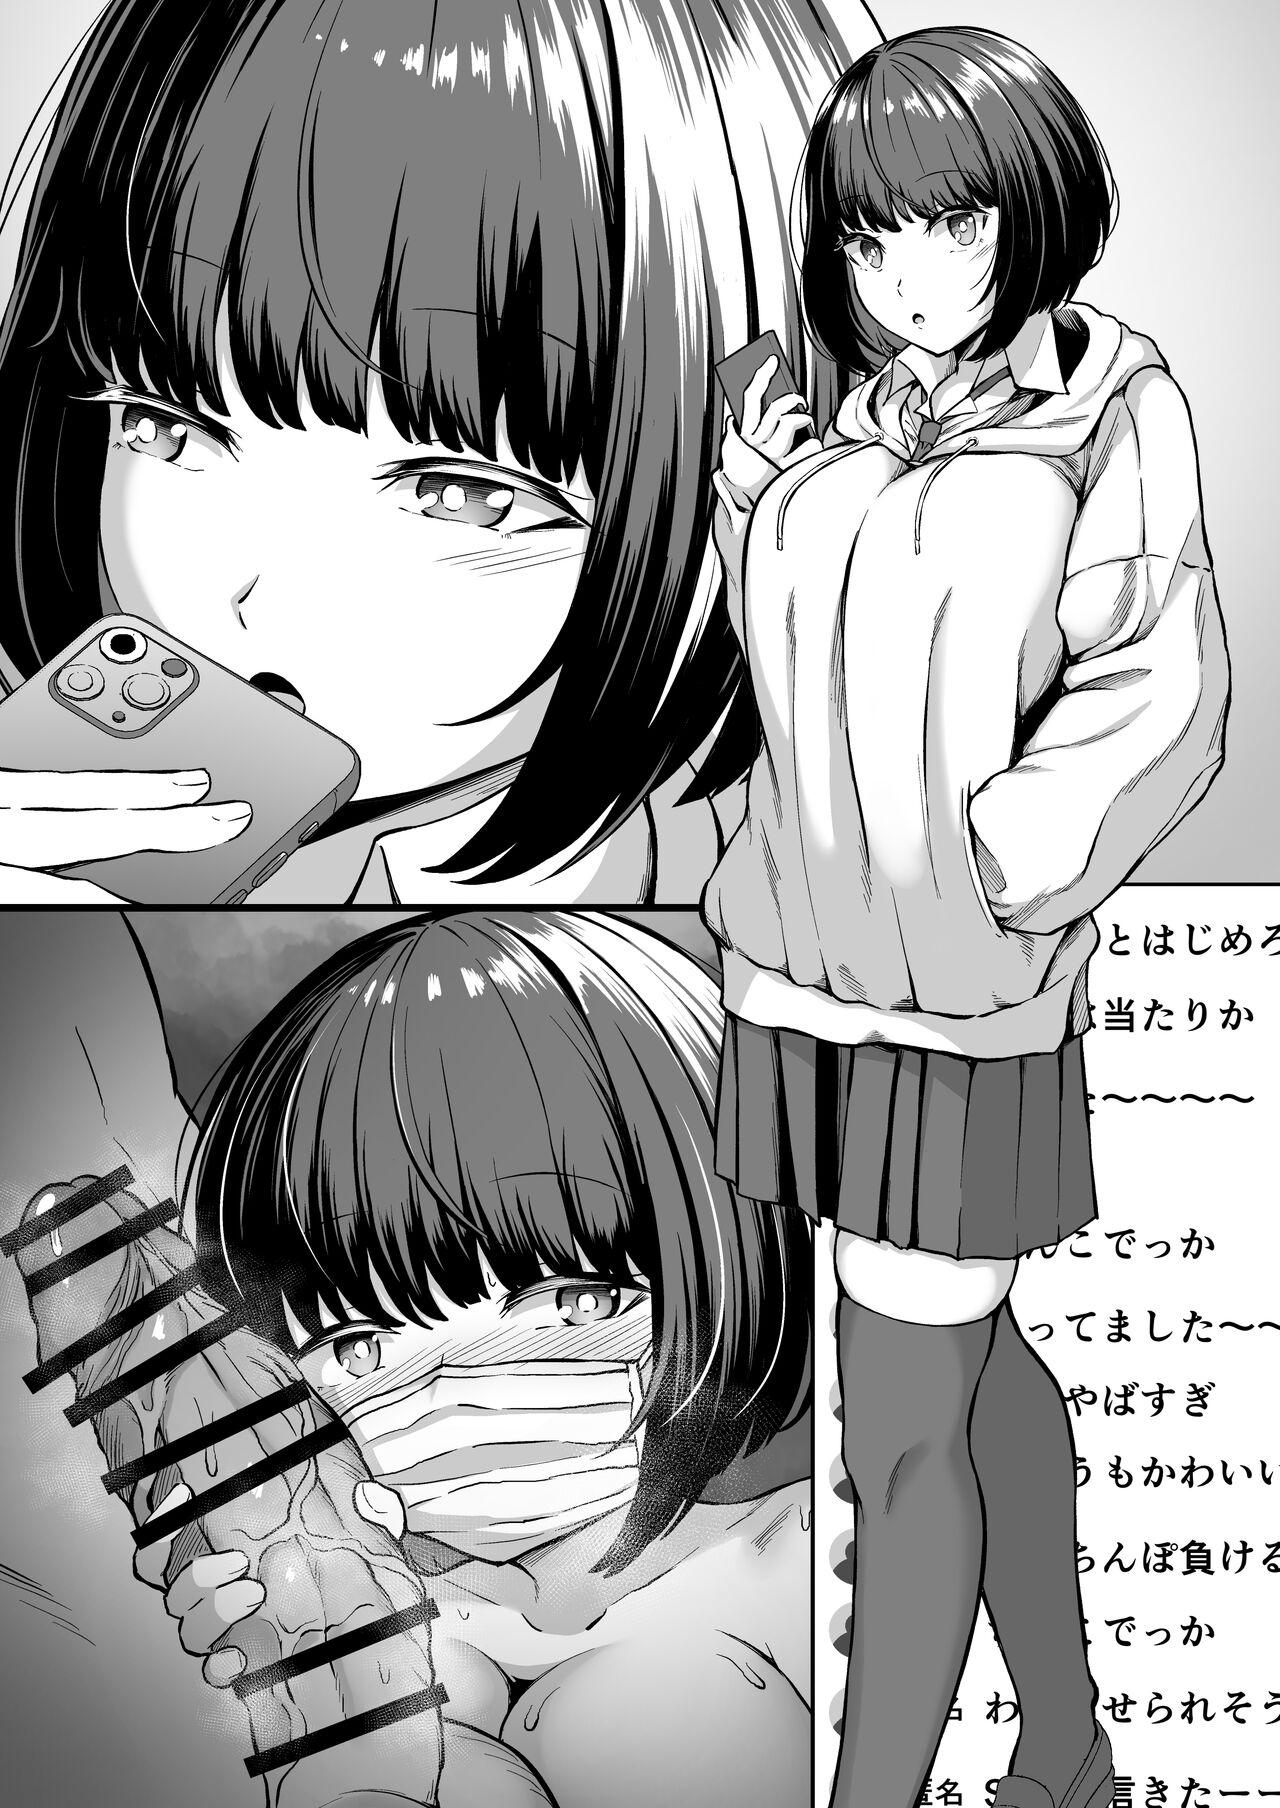 Old Young 好きだった女の子に告白してみた Best Blowjobs - Page 3